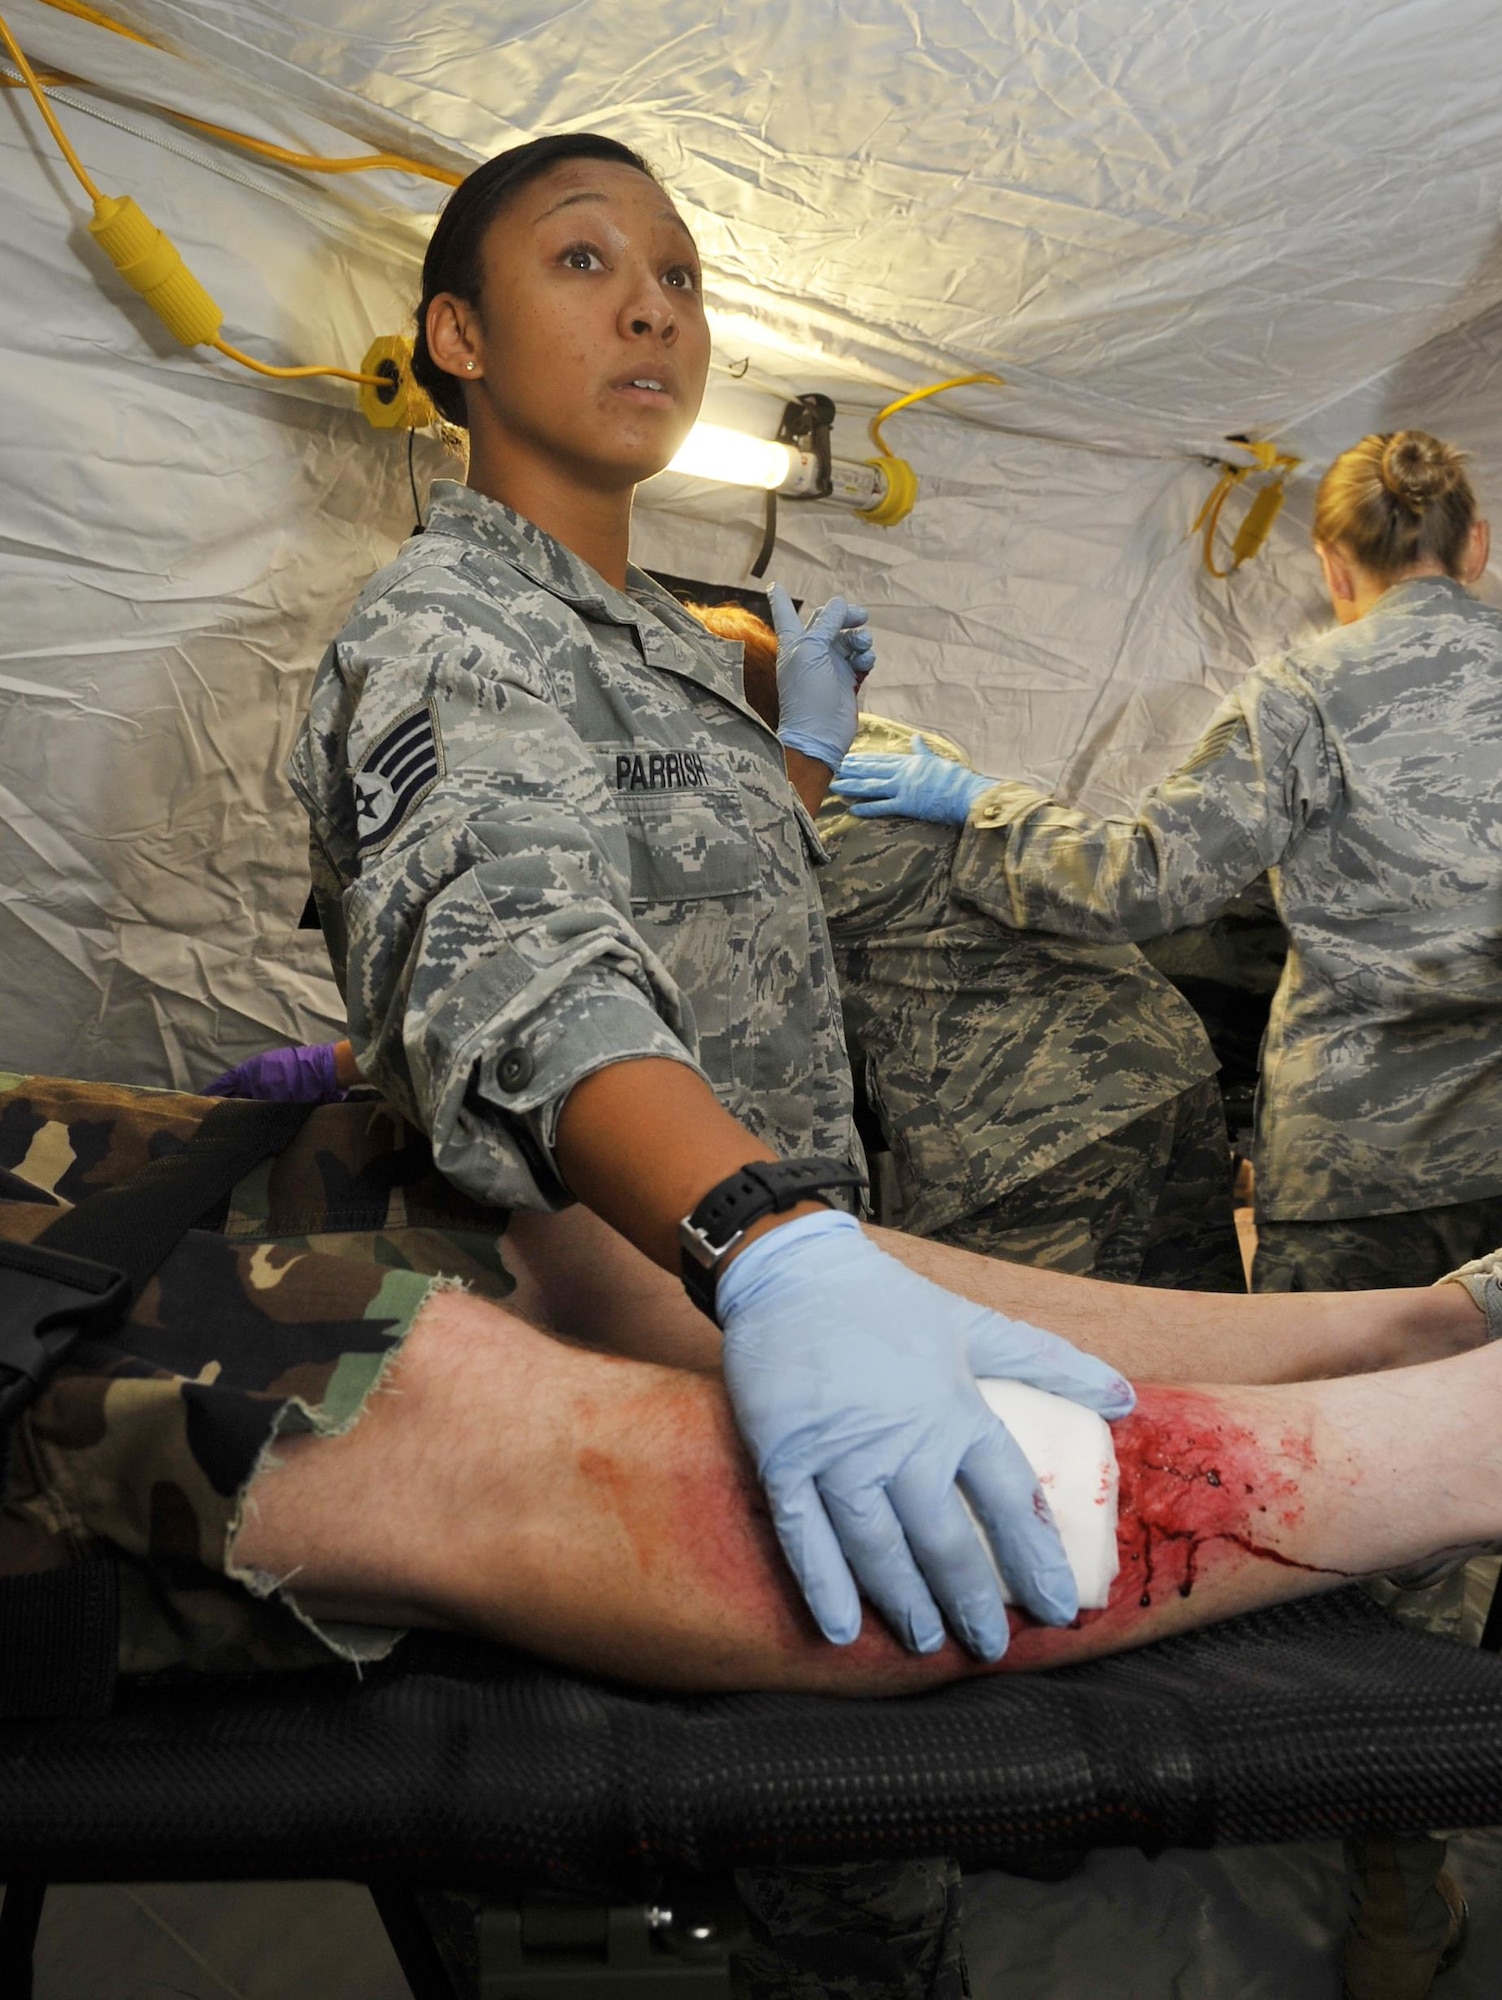 An U.S. Air Forces in Europe and Air Forces Africa medical unit member patches up the leg of a wounded patient during expeditionary medical support training Aug. 28, 2013, at Ramstein Air Base, Germany. EMEDS training is conducted to prepare Airmen for humanitarian missions. (U.S. Air Force photo/Airman Dymekre Allen) 